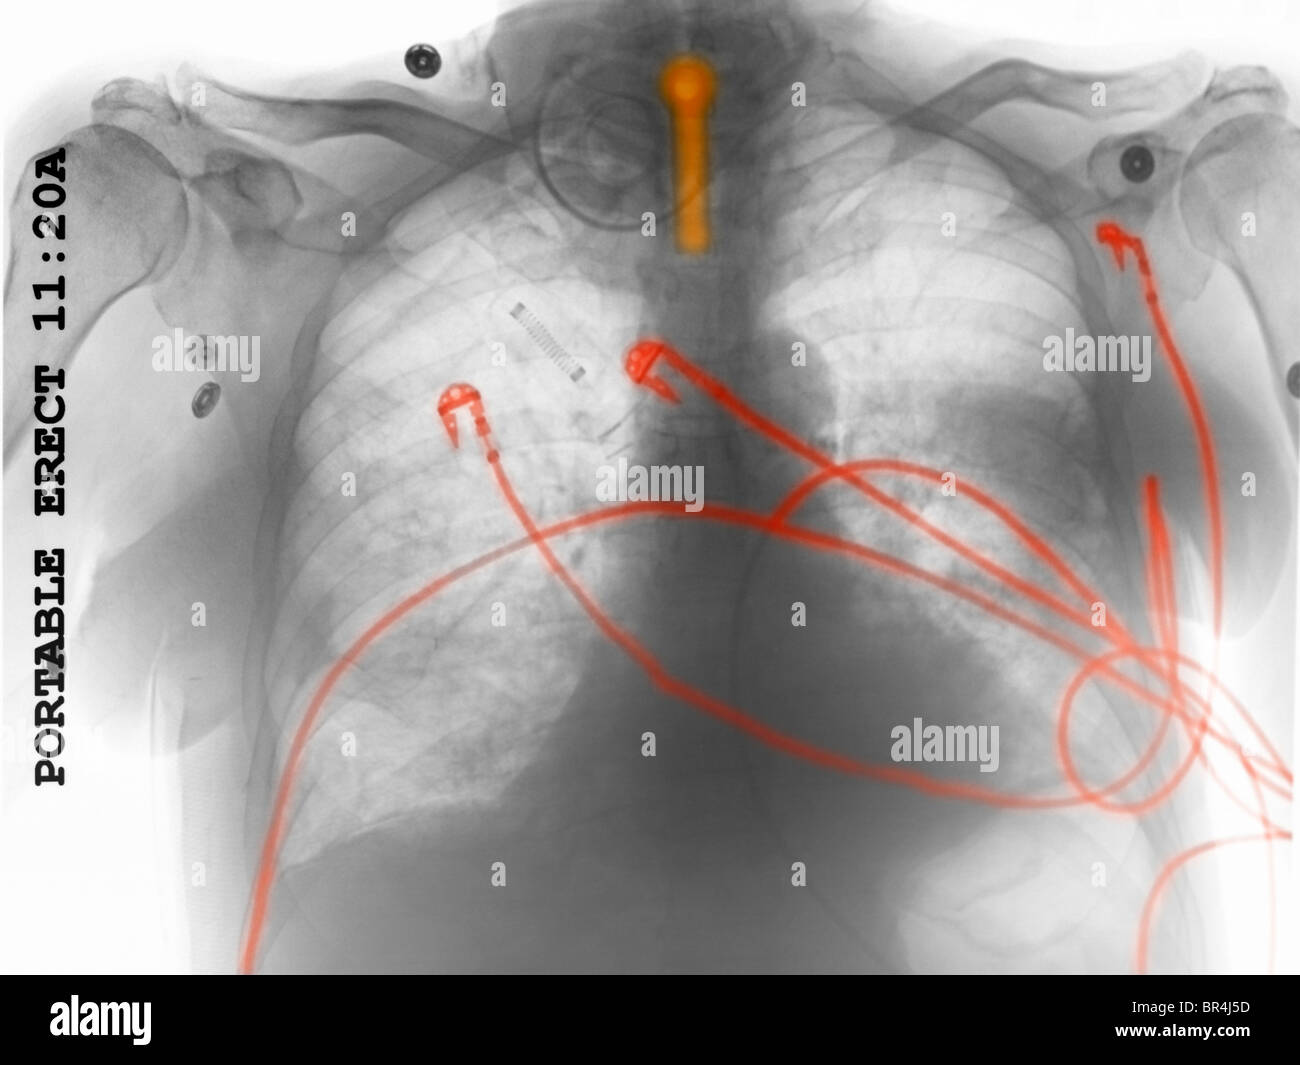 Chest x-ray of a 69 year old man intubated and with monitoring leads Stock Photo